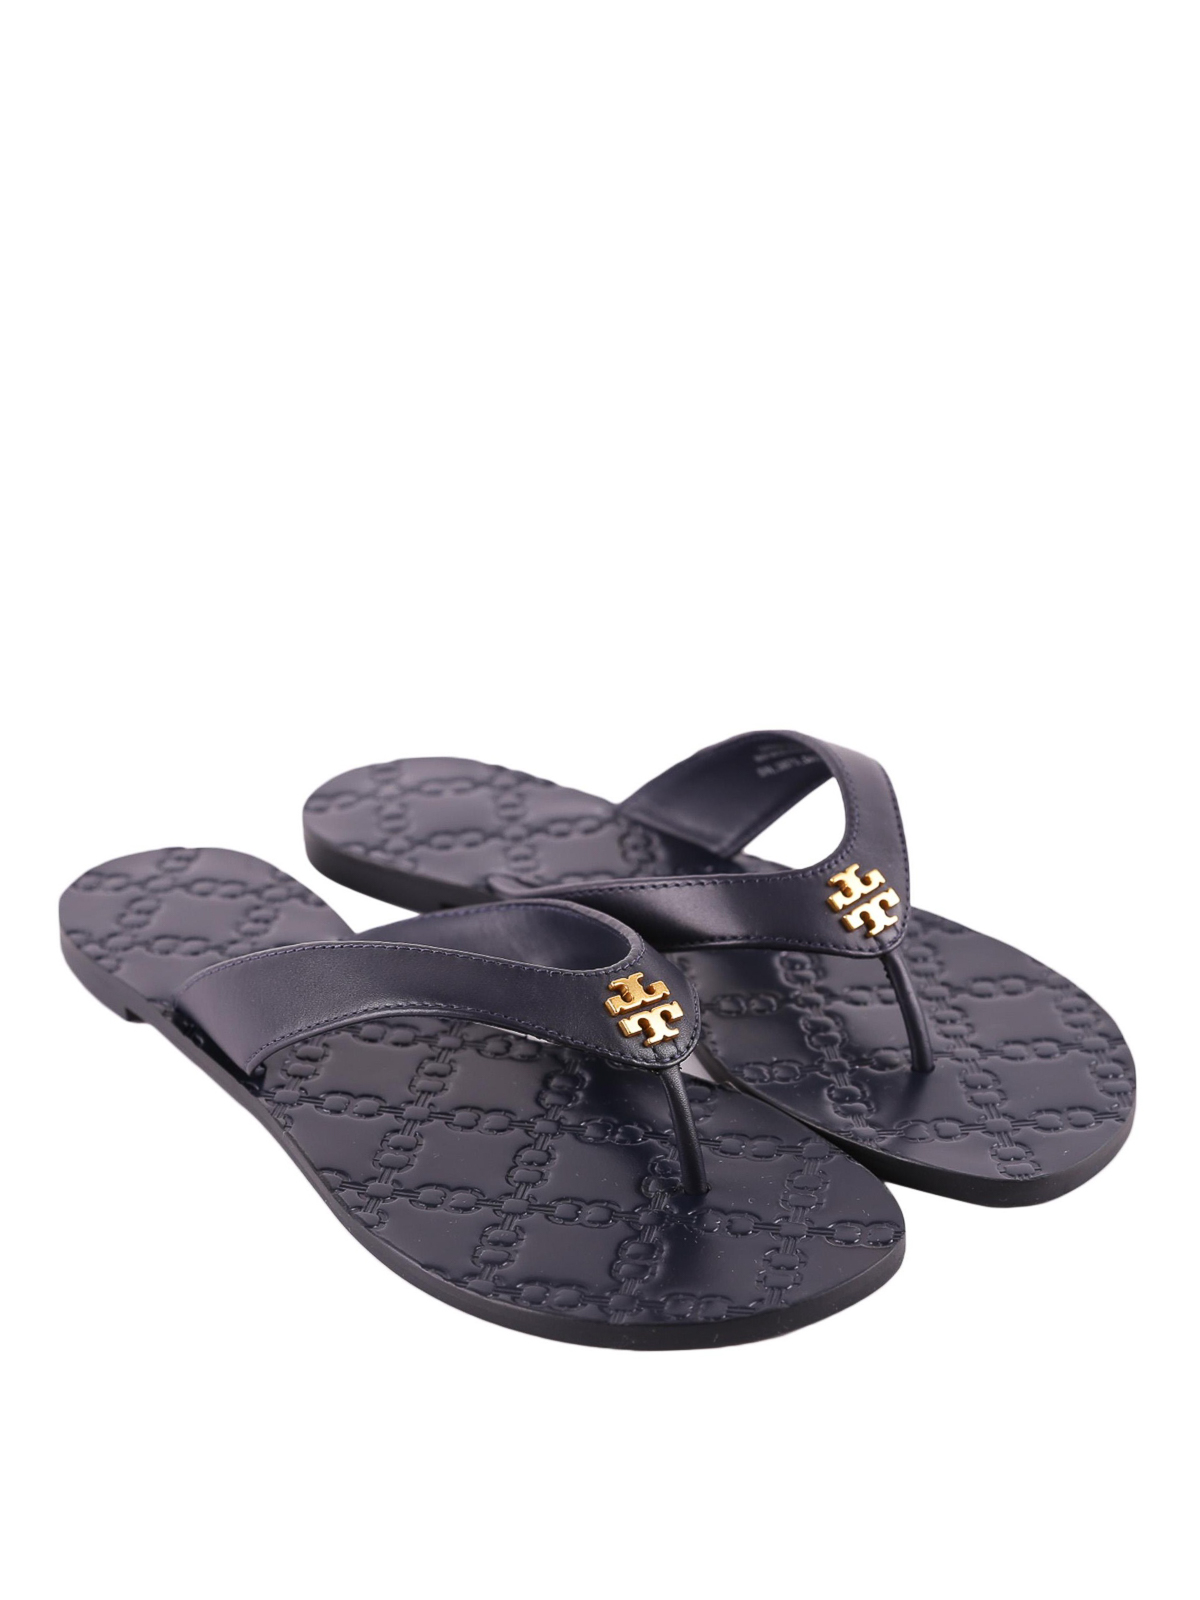 Sandals Tory Burch - Monroe leather thong sandals - 39670403 